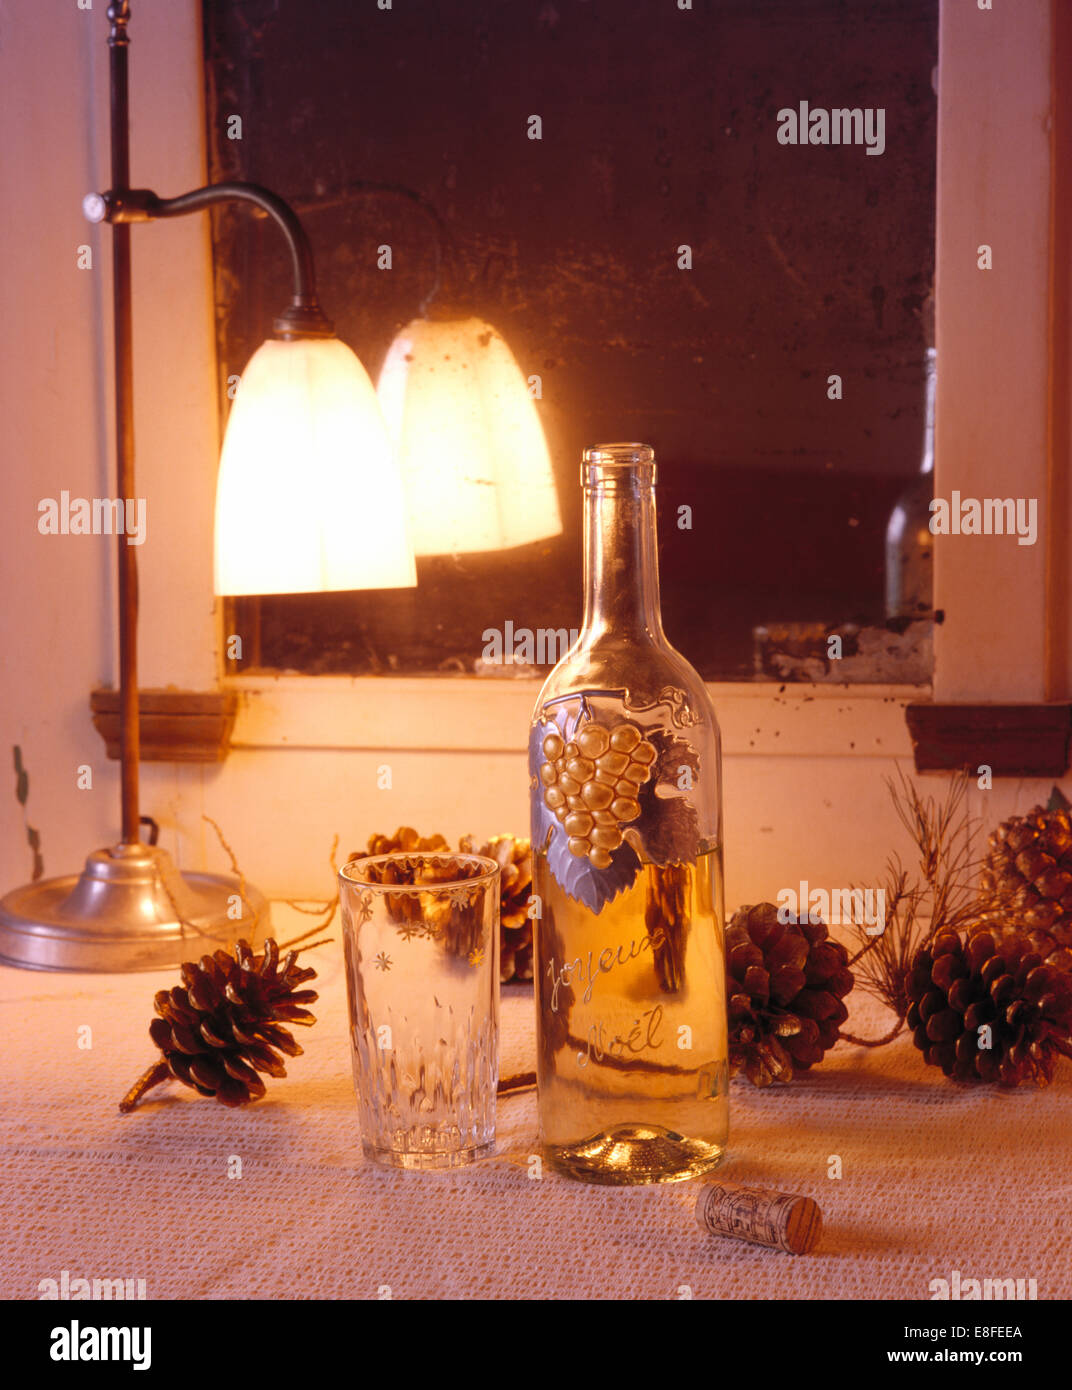 Close-up of lighted lamp and hand-painted glass bottle on table with festive pine cones Stock Photo